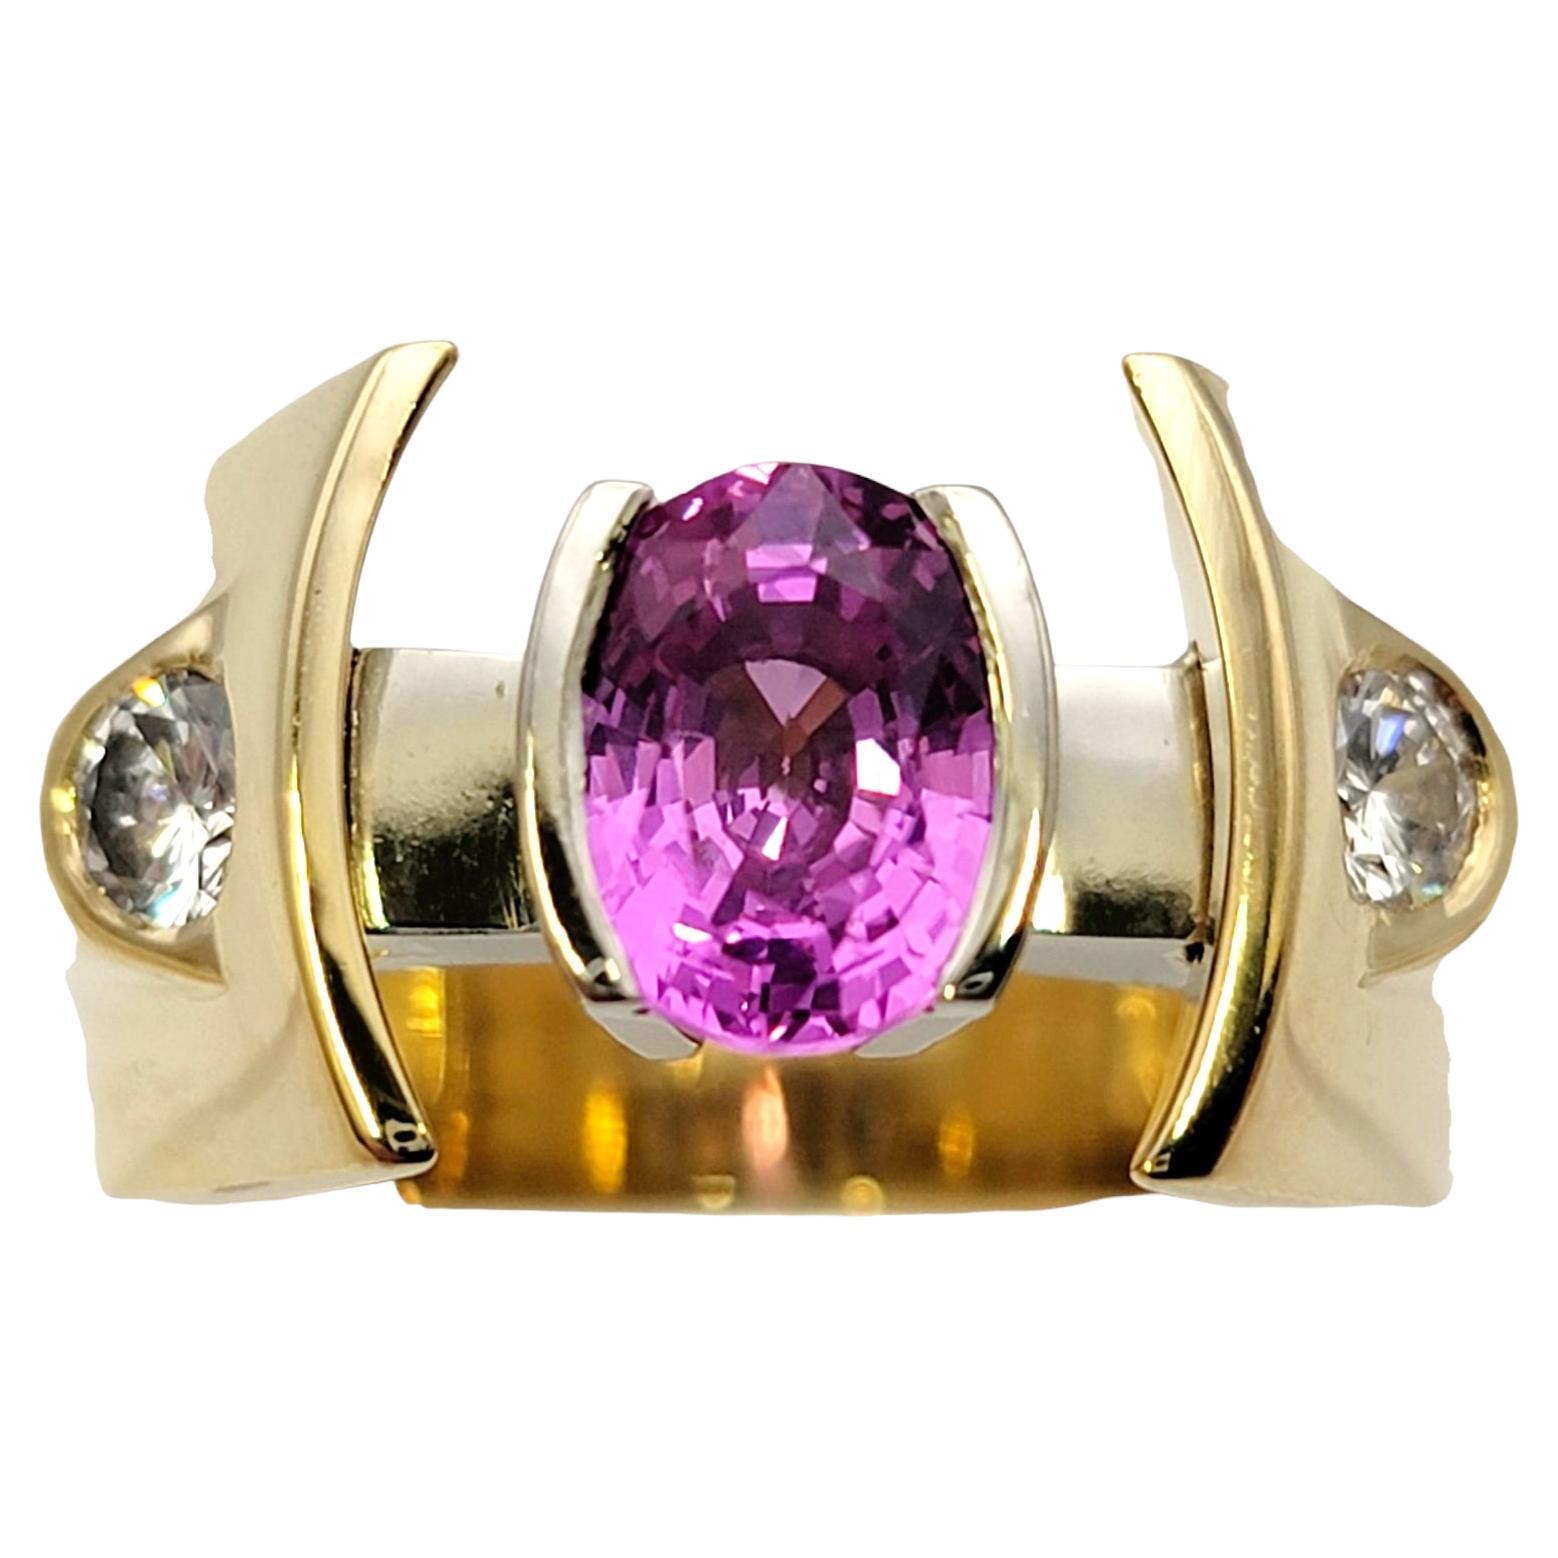 Ring size: 9.75

Ultra contemporary pink sapphire and diamond statement ring offers a bold look with a with unique design. A bright pink oval shaped sapphire sits at the very center, half bezel set in 18 karat gold. There is a significant gap on